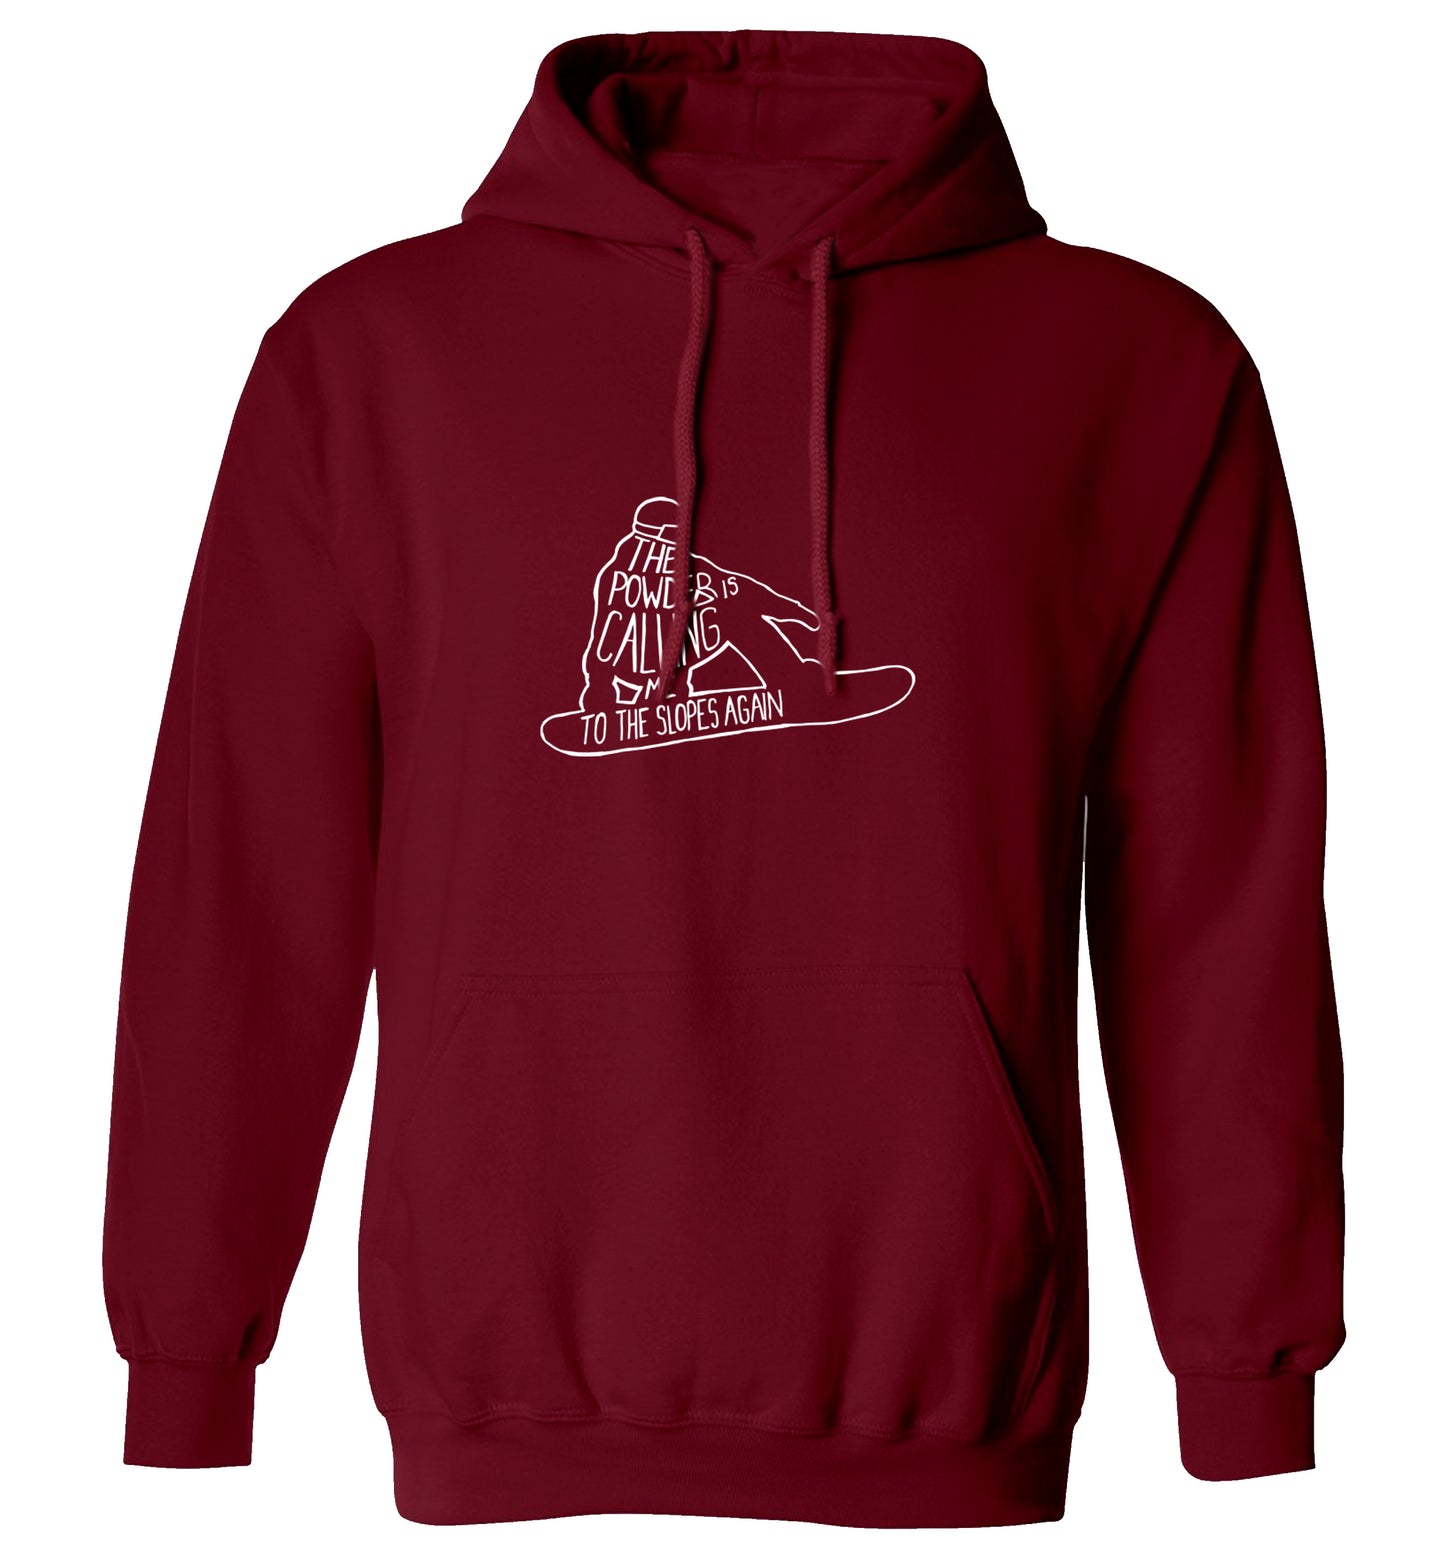 The powder is calling me to the slopes again adults unisex maroon hoodie 2XL